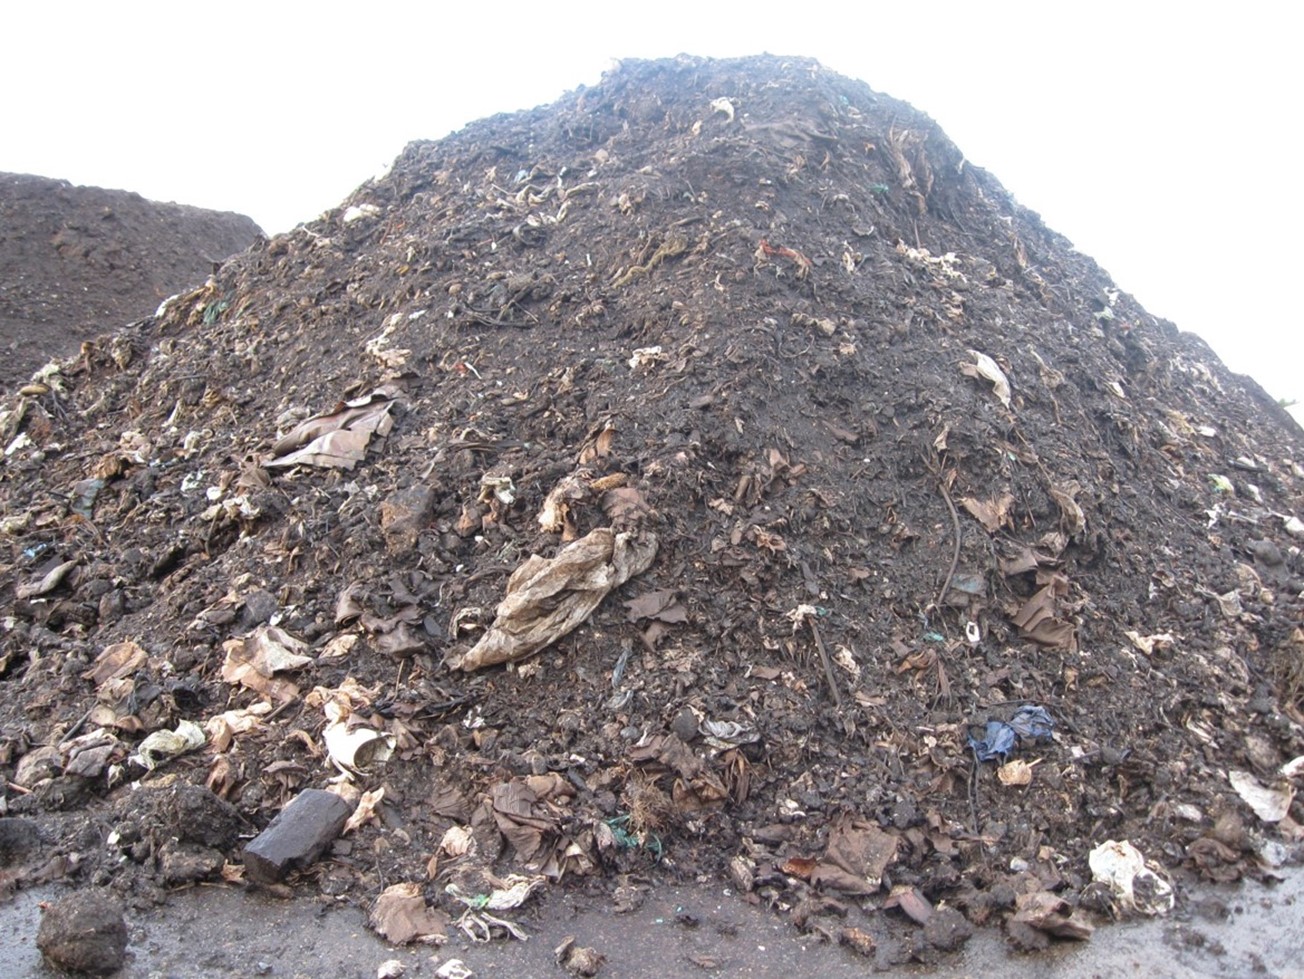 Pictured here is a contaminated compost pile prior to screening.